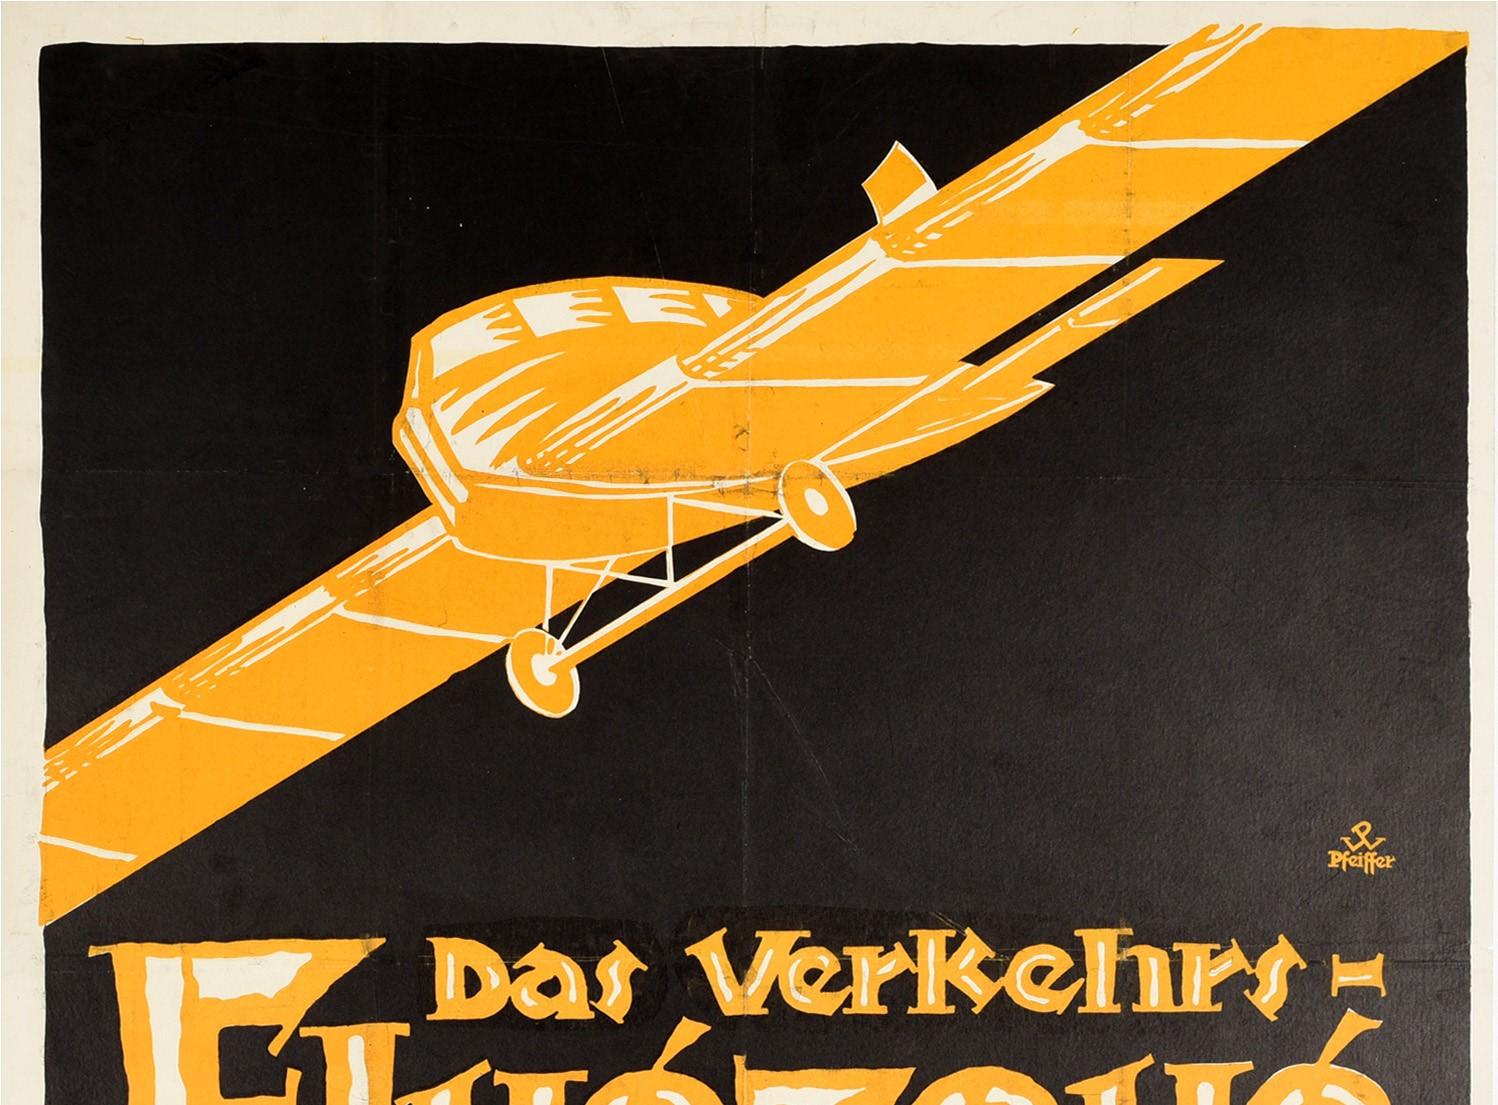 Original vintage event advertising poster for Das Verkehrsflugzeug ein Vortrag mit Lichtbildern und 2 filmen / The Airliner a lecture with photographs and two films featuring a great design depicting a plane flying above the bold stylised lettering